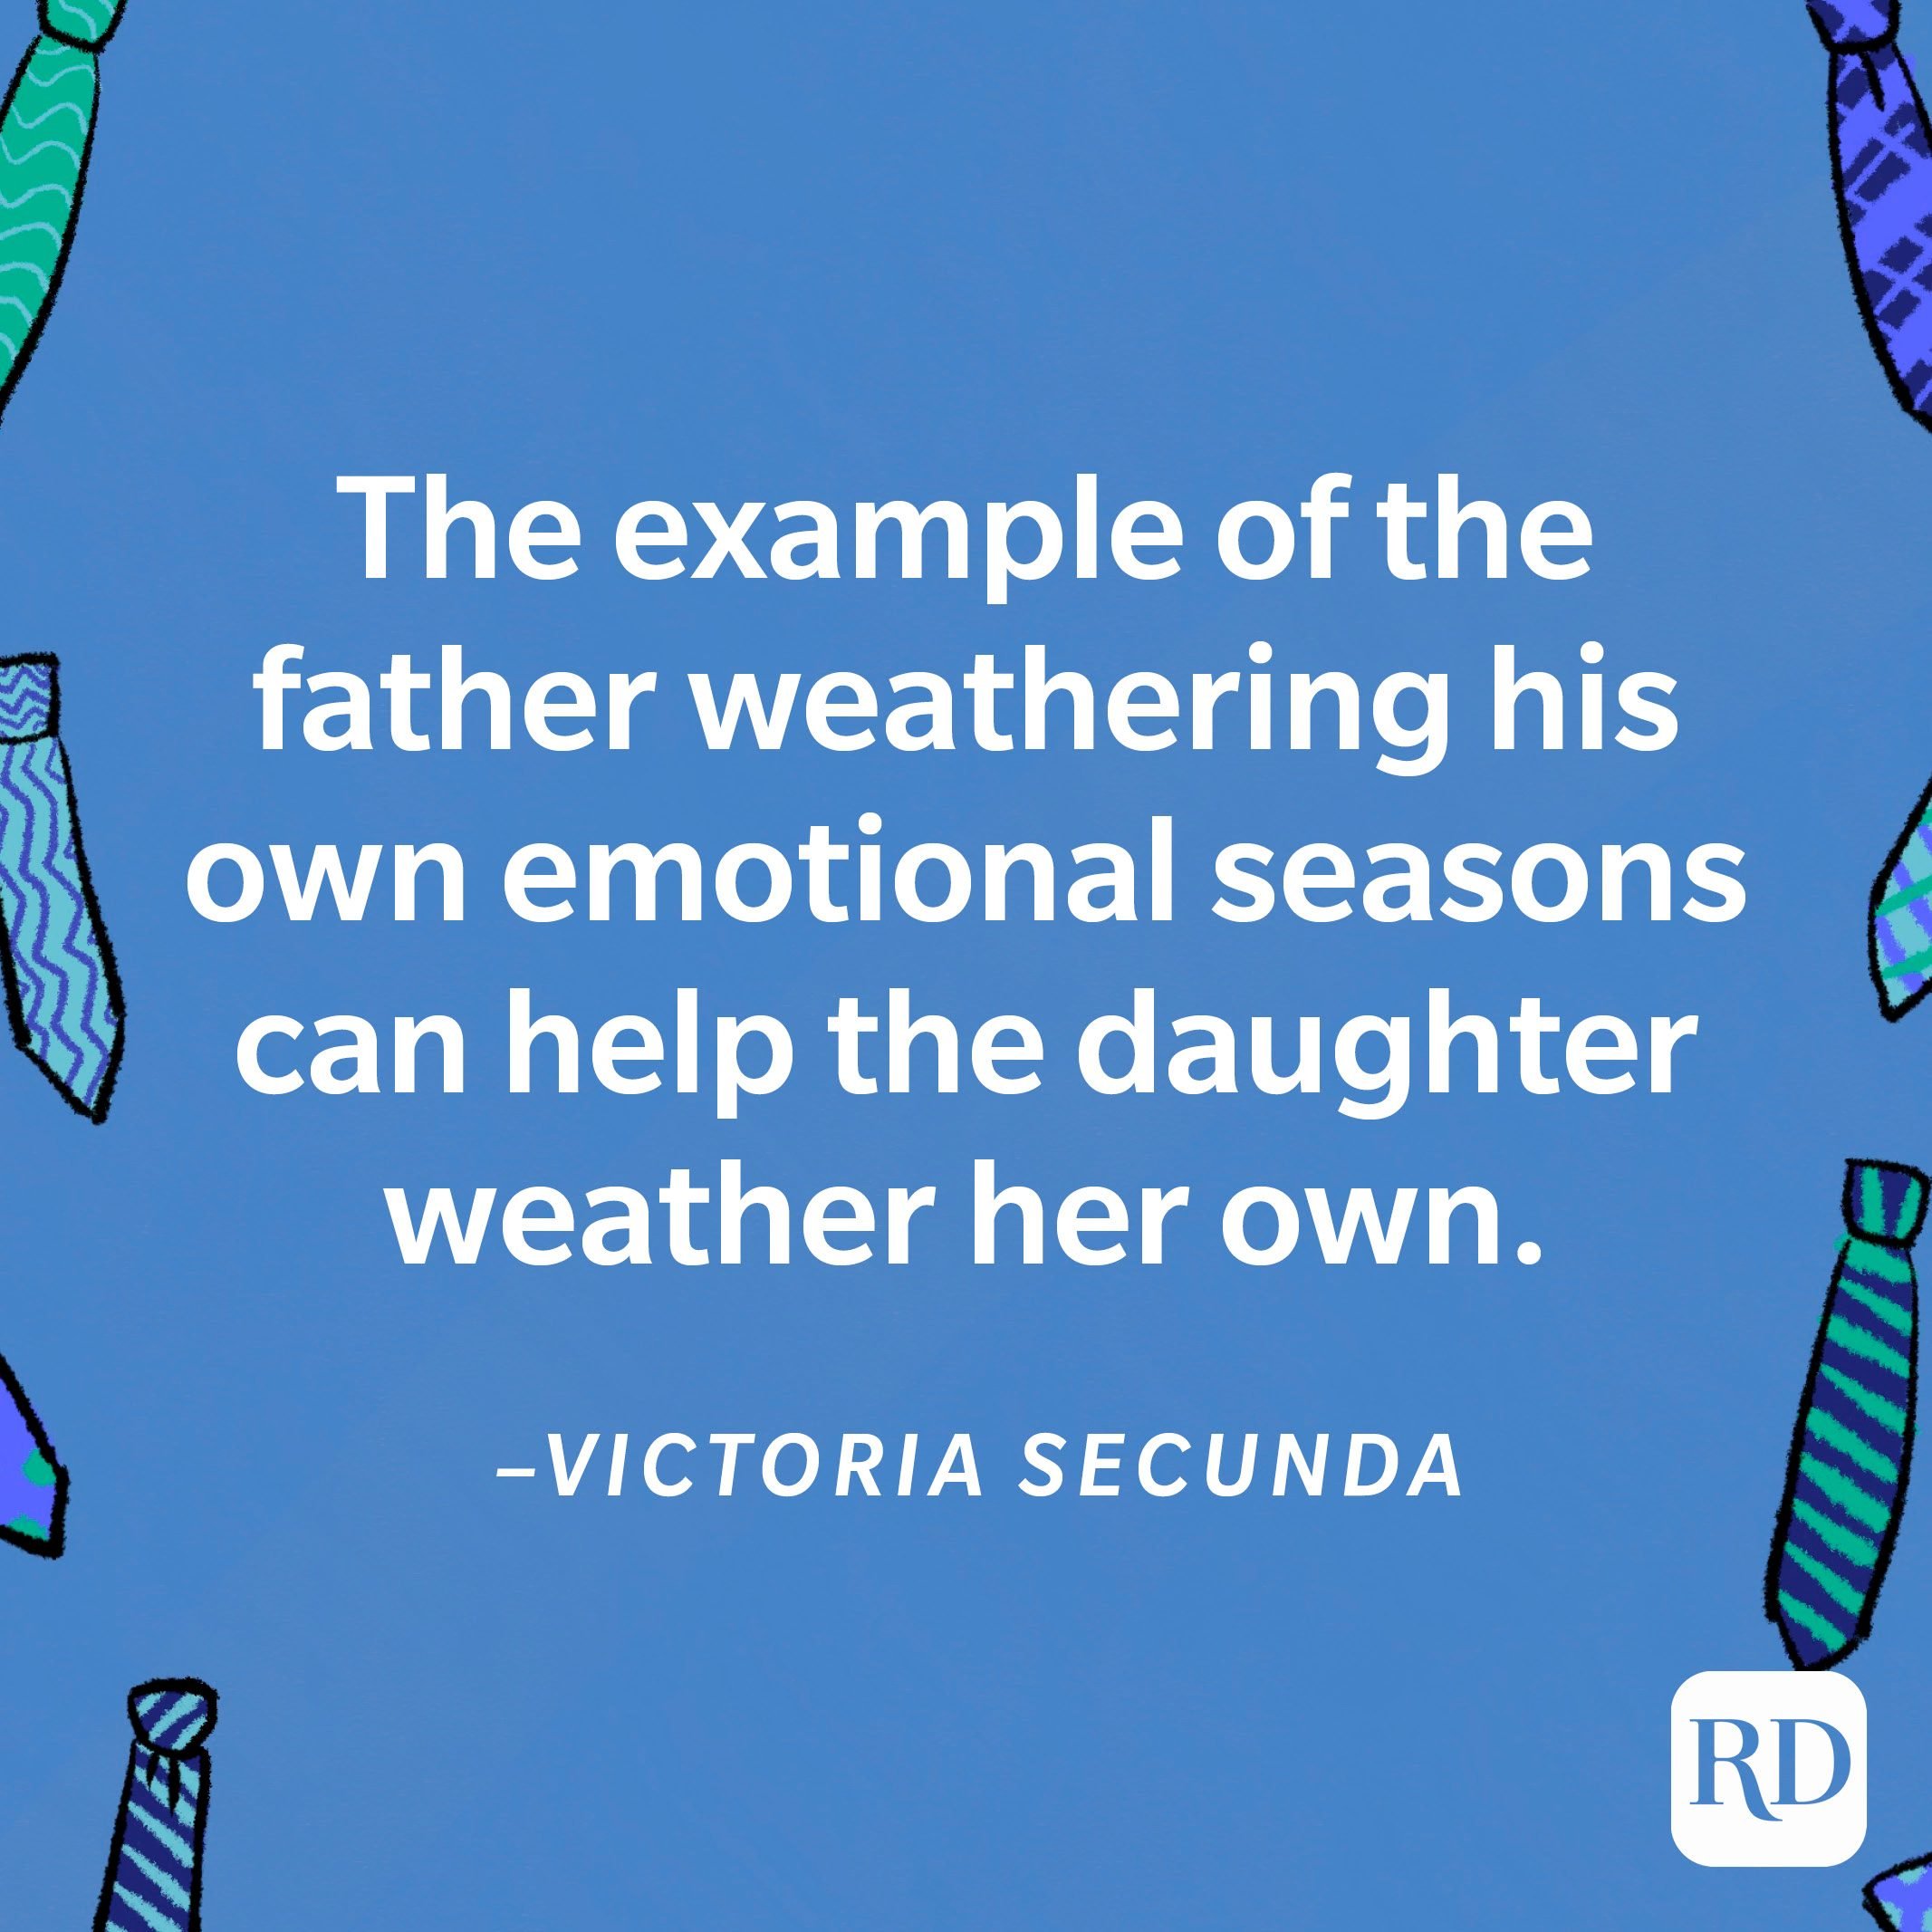 "The example of the father weathering his own emotional seasons can help the daughter weather her own.”―Victoria Secunda 26